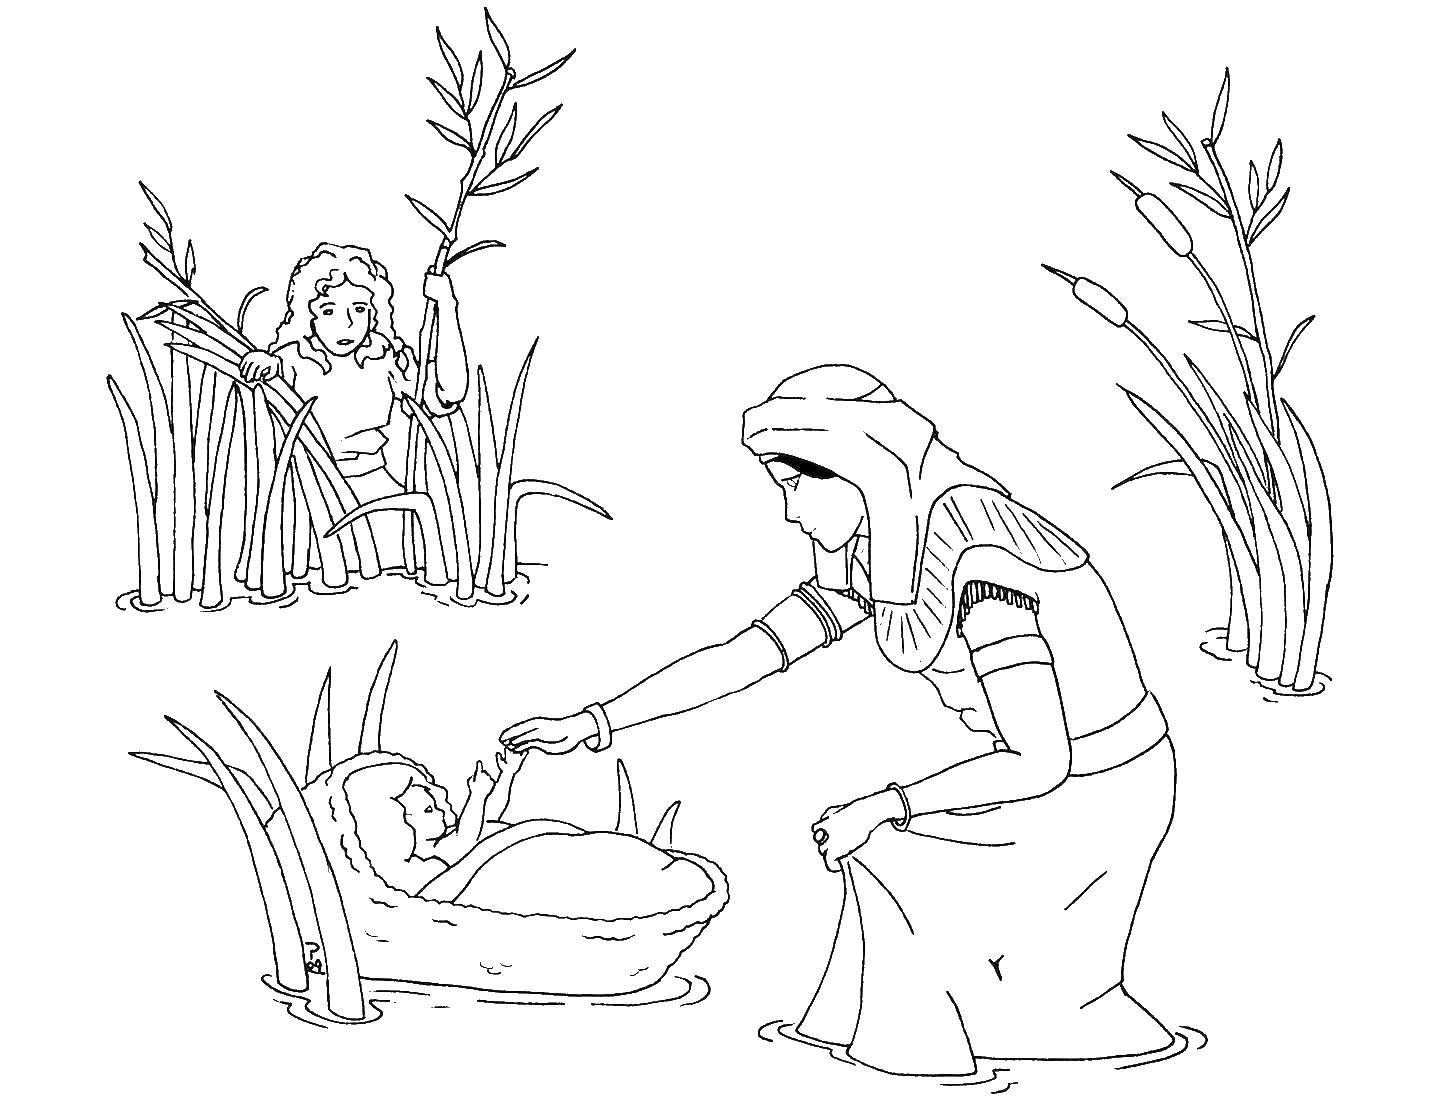 Coloring Moses. Category religion. Tags:  religion, boy, Moses.